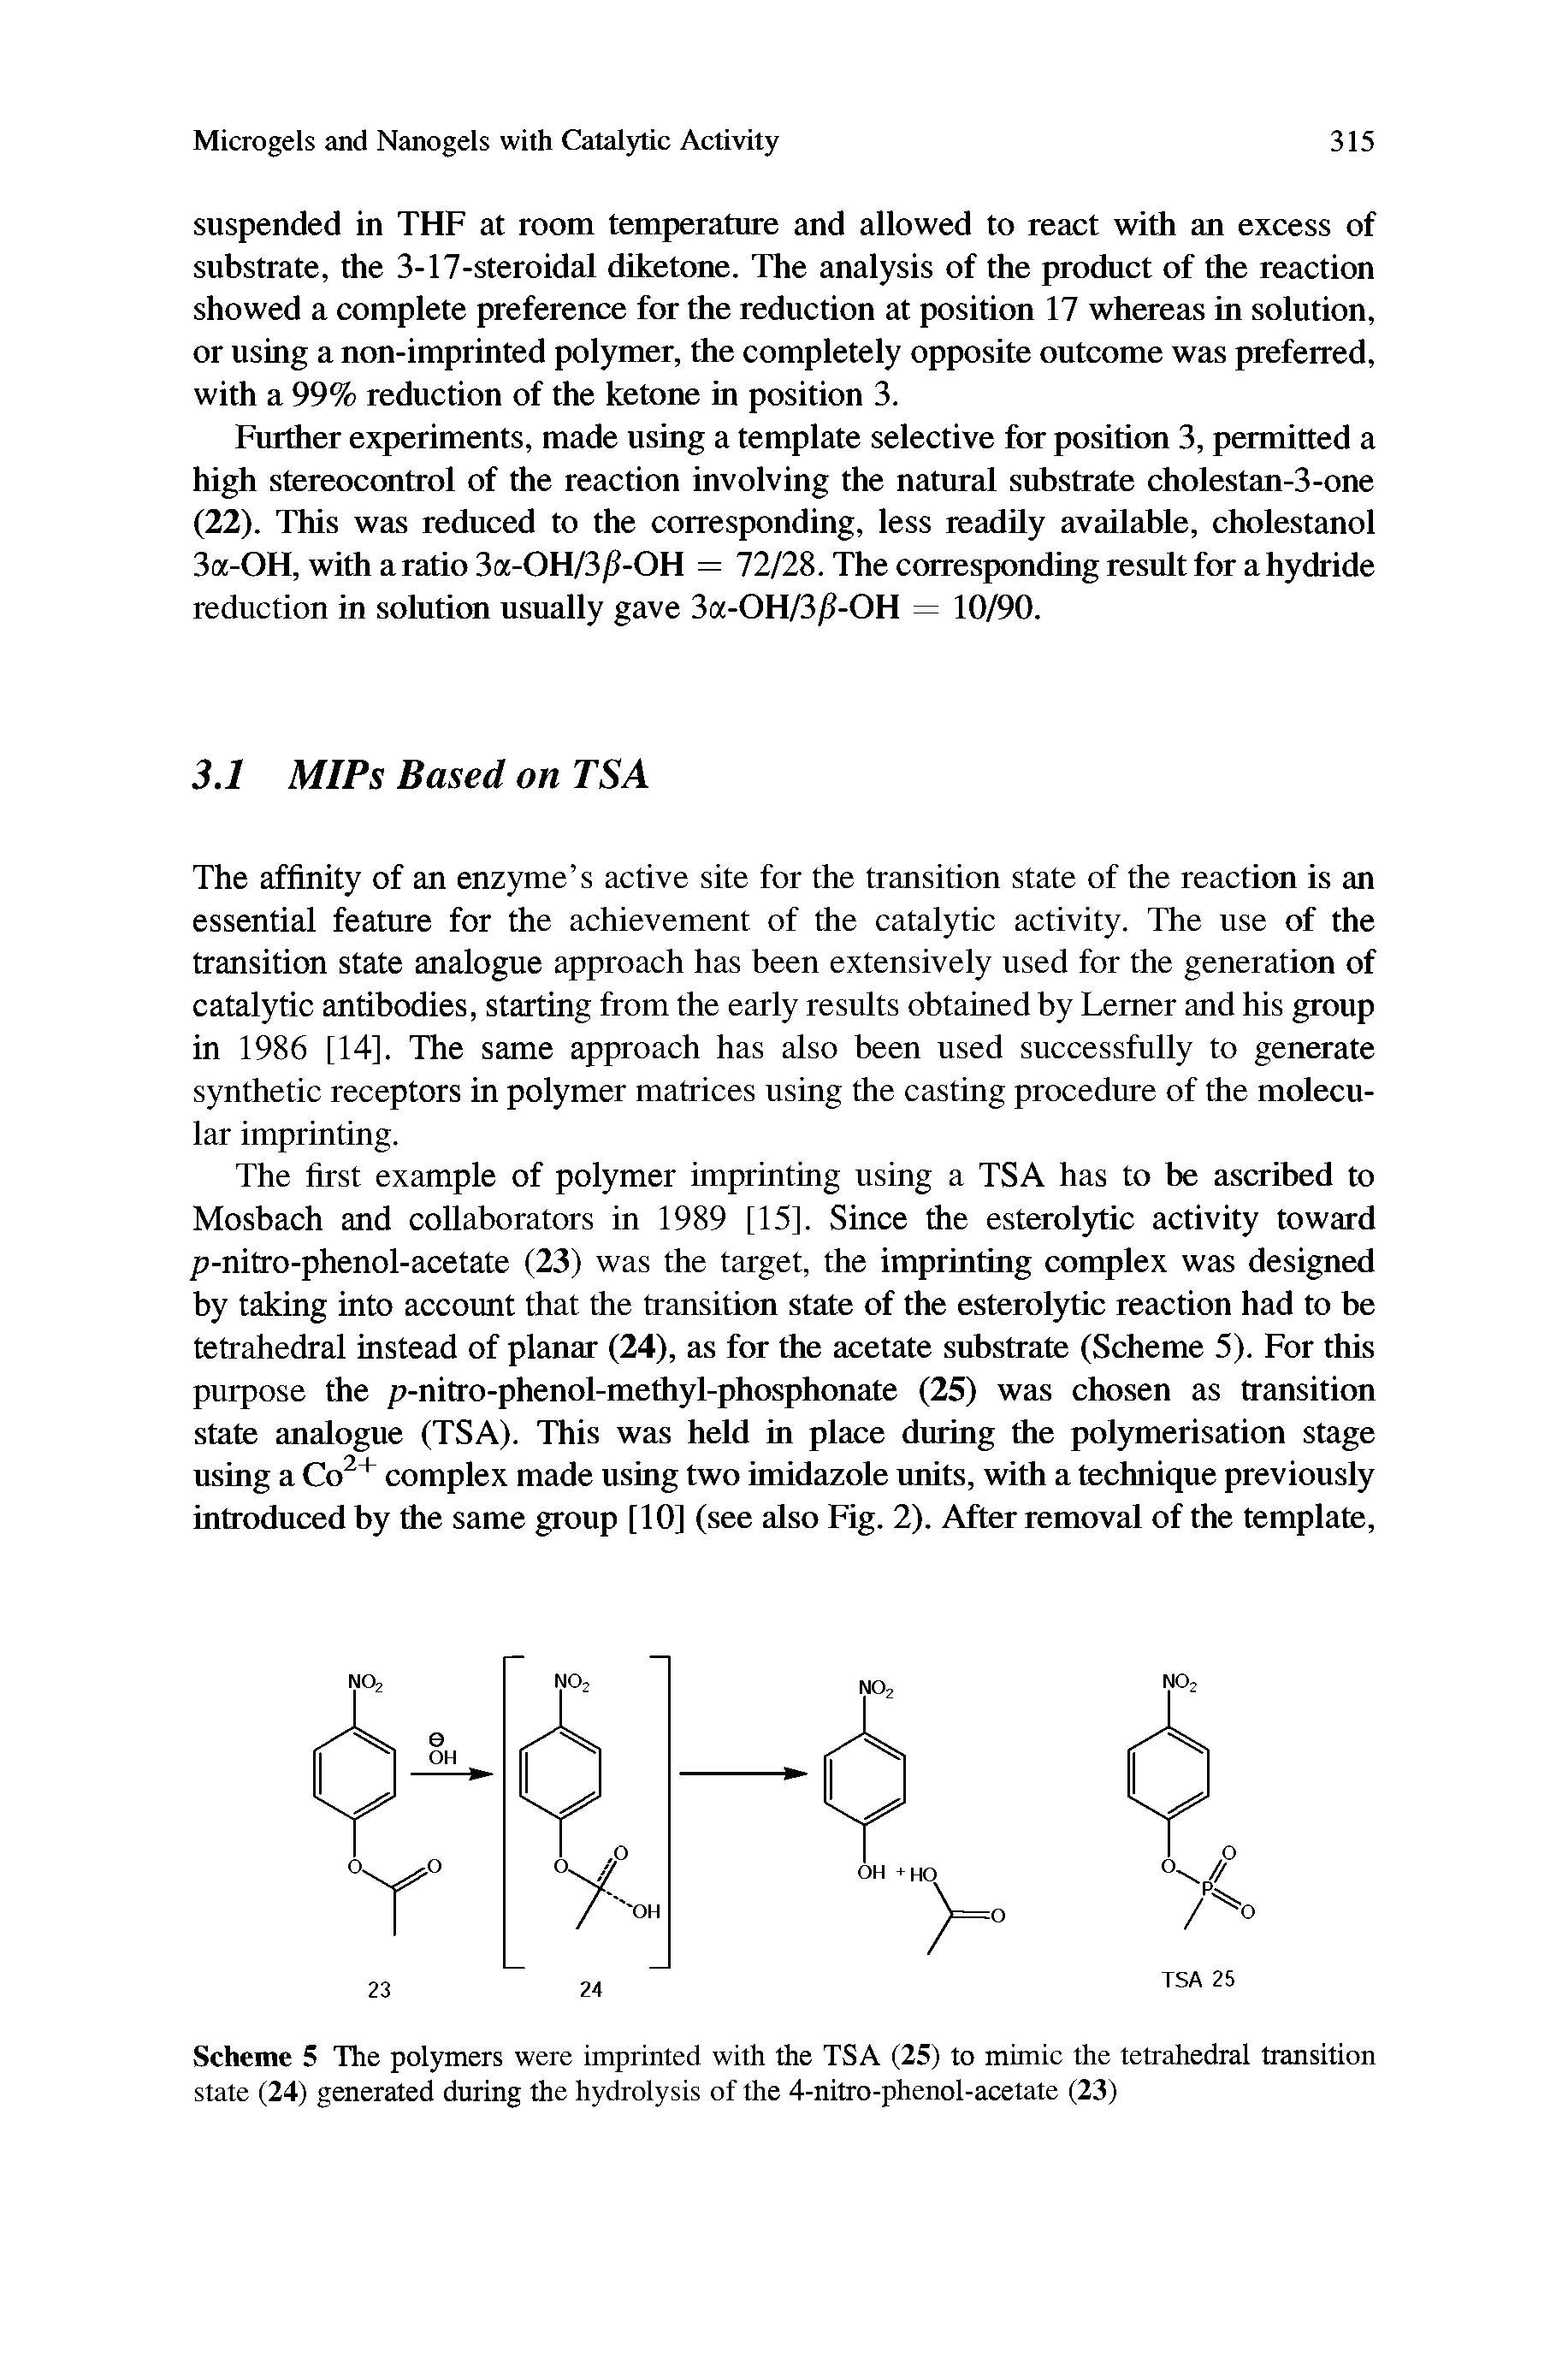 Scheme 5 The polymers were imprinted with the TSA (25) to mimic the tetrahedral transition state (24) generated during the hydrolysis of the 4-nitro-phenol-acetate (23)...